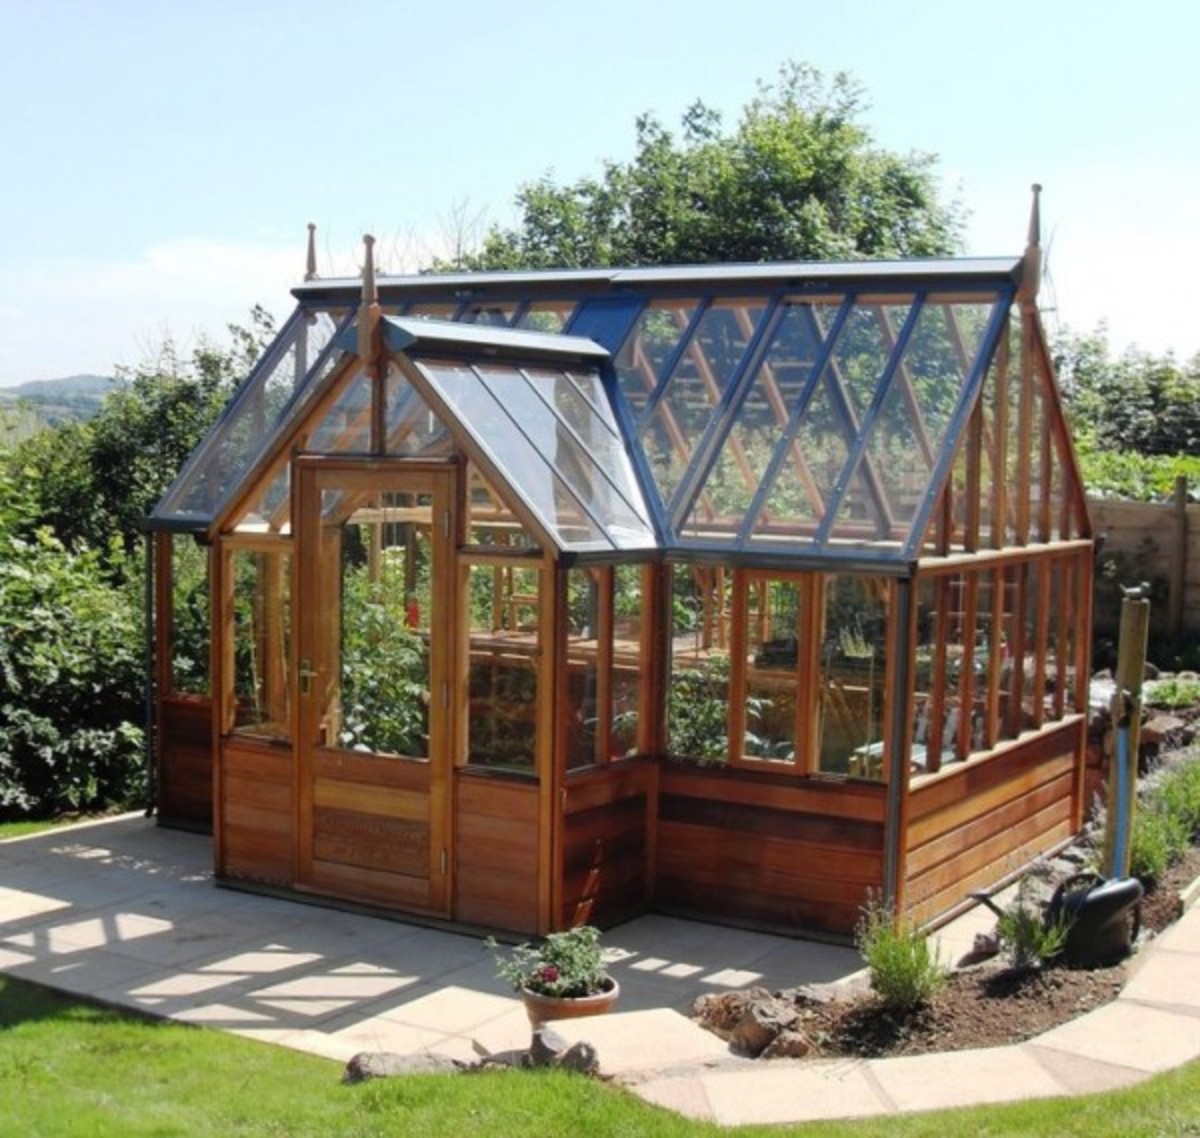 Greenhouse made of wood